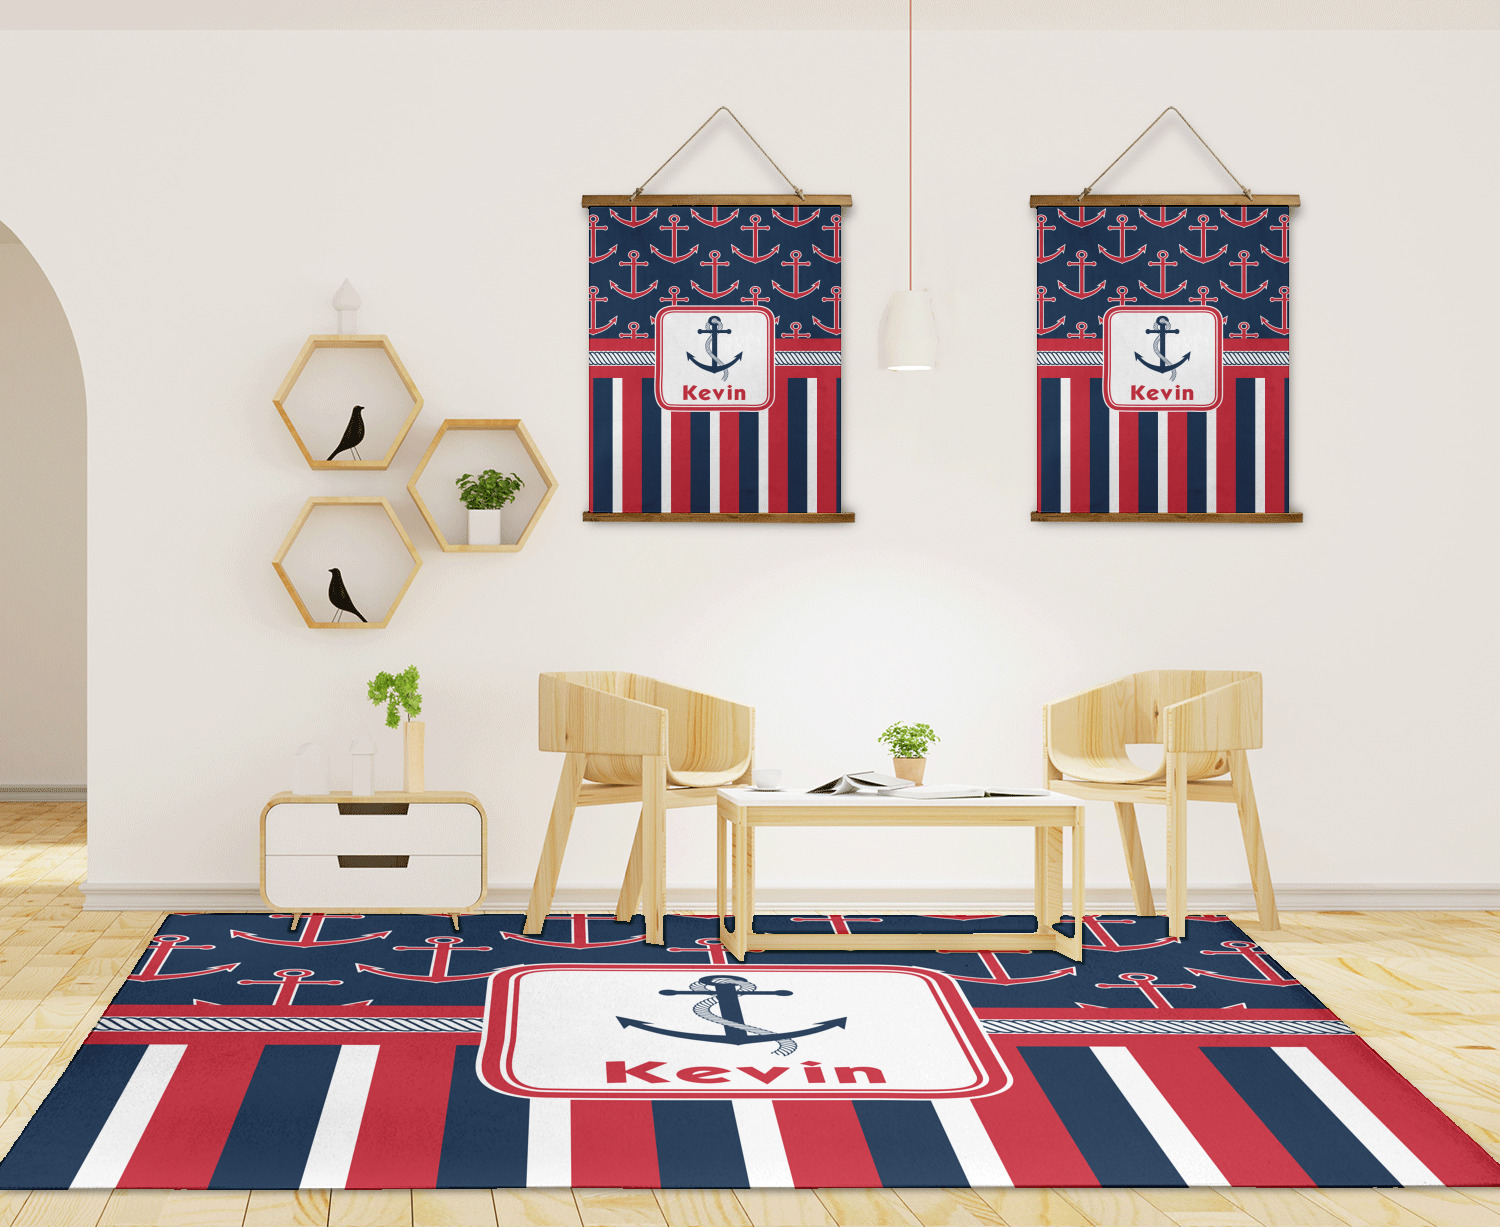 https://www.youcustomizeit.com/common/MAKE/190463/Nautical-Anchors-Stripes-8-x10-Indoor-Area-Rugs-IN-CONTEXT.jpg?lm=1666624088